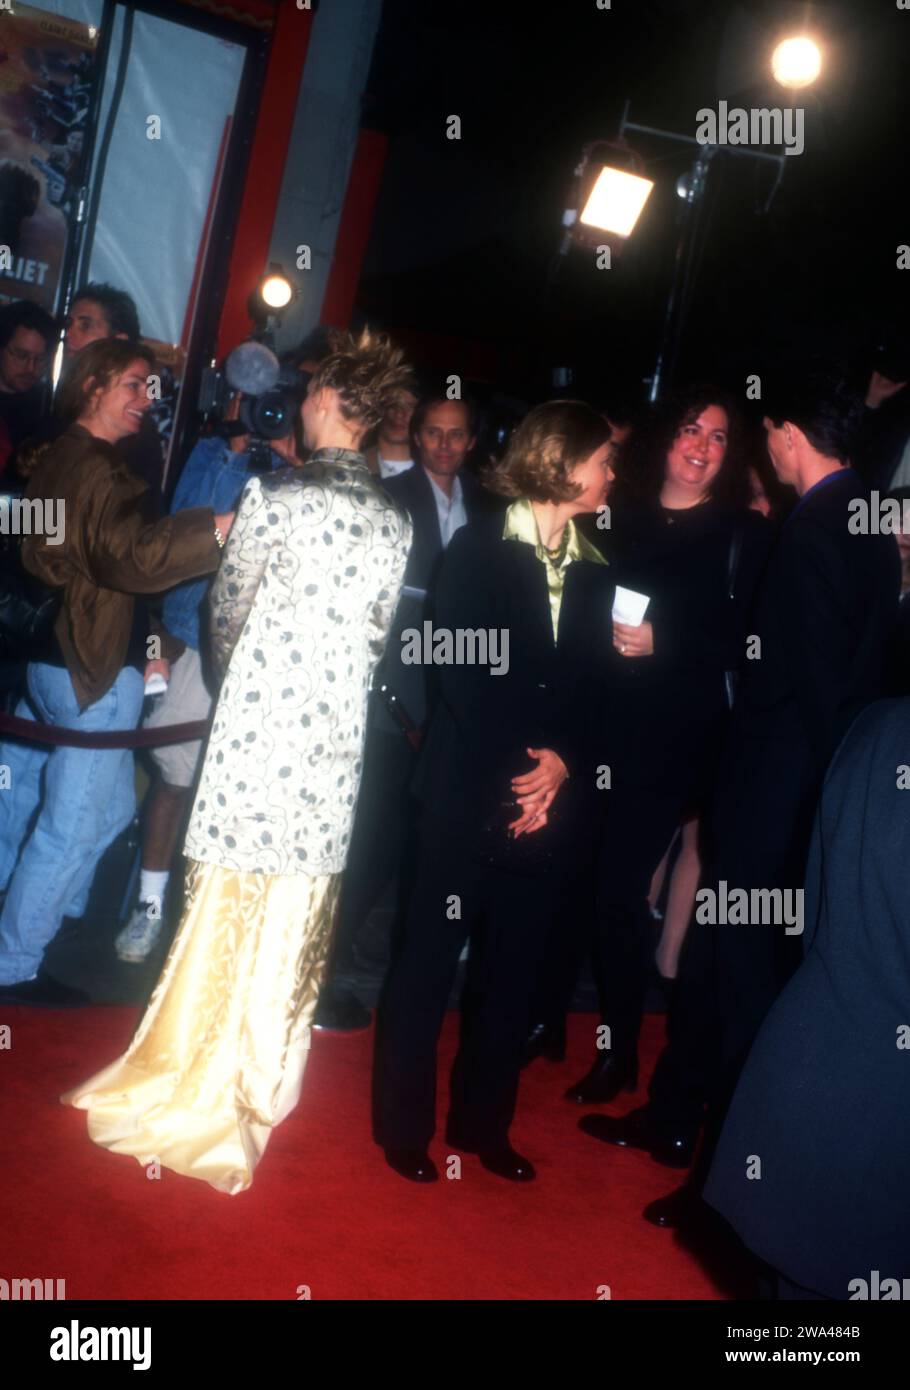 Los Angeles, California, USA 27th October 1996 Actress Claire Danes, wearing Prada attends 20th Century FoxÕs ÔRomeo & JulietÕ Premiere at Mann Chinese Theatre on October 27, 1996 in Los Angeles, California, USA. Photo by Barry King/Alamy Stock Photo Stock Photo